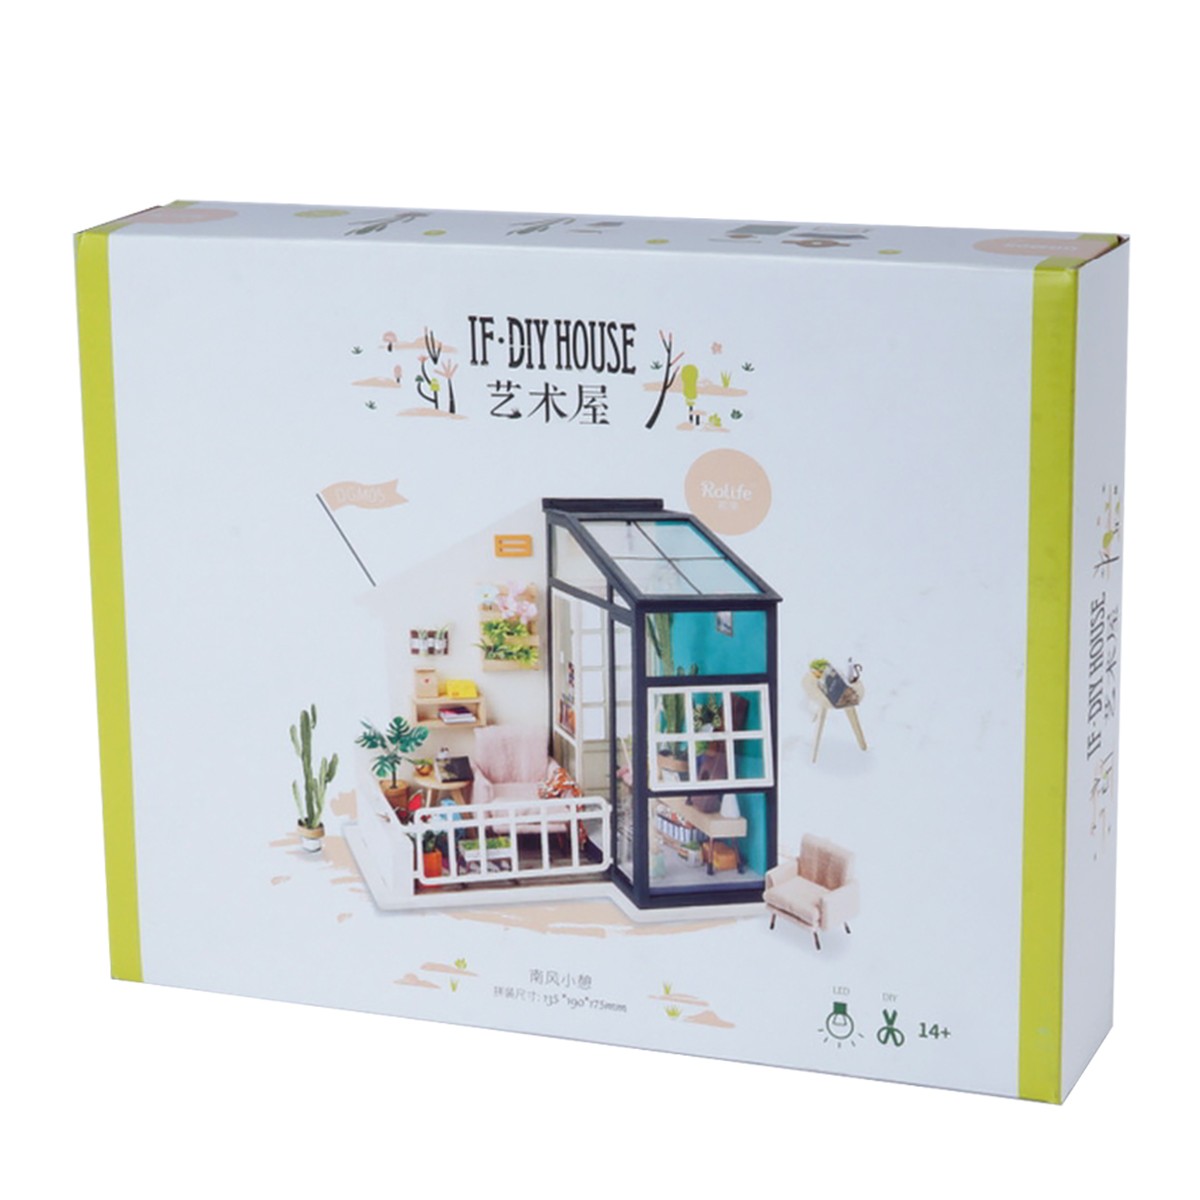 Robotime DIY Miniature House Balcony Daydreaming 3d Wooden Model Kit for sale online